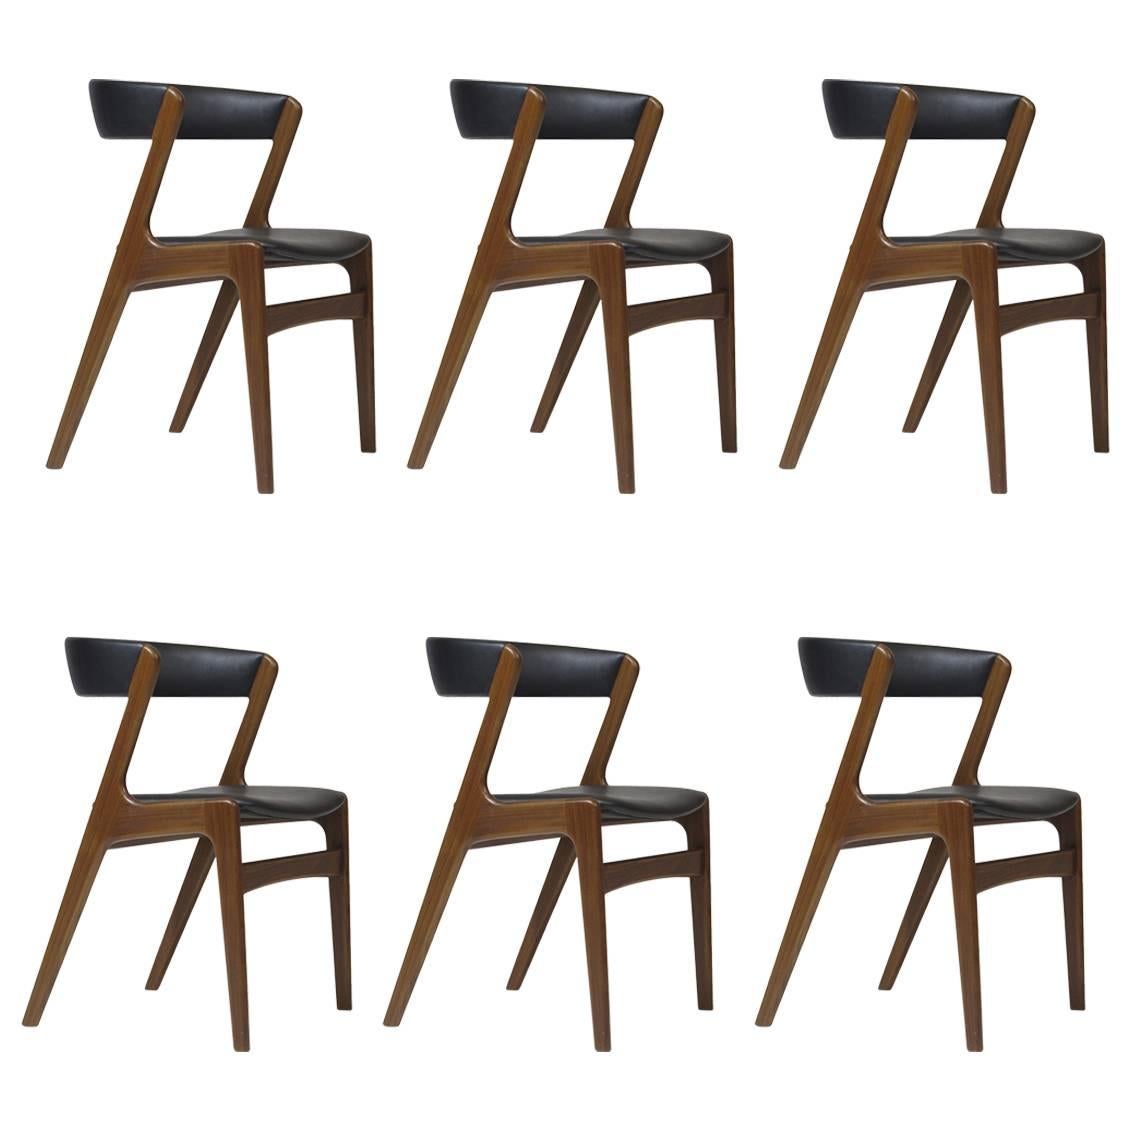 Danish Curved Back Dining Chairs